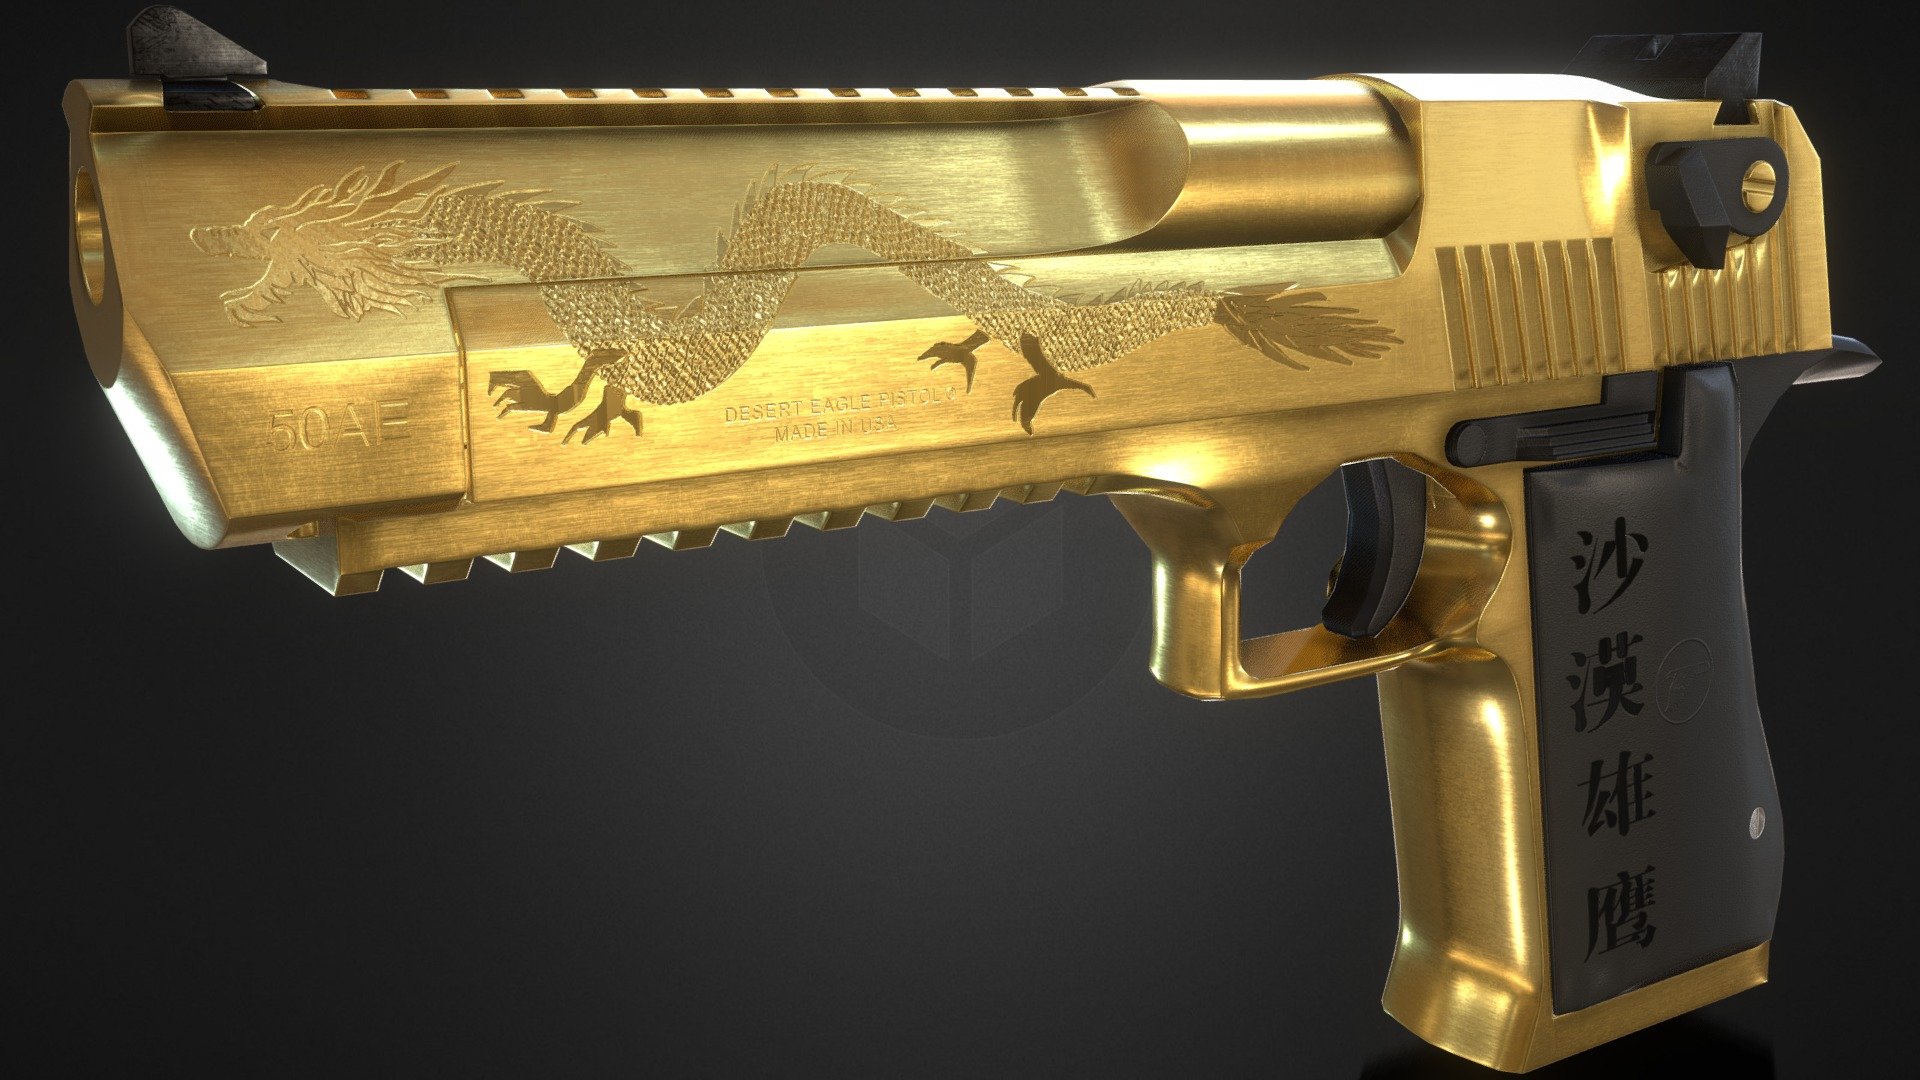 Golden Desert Eagle 3d model with chinese dragon engraving. Made with 3ds max and Substance painter 3d model